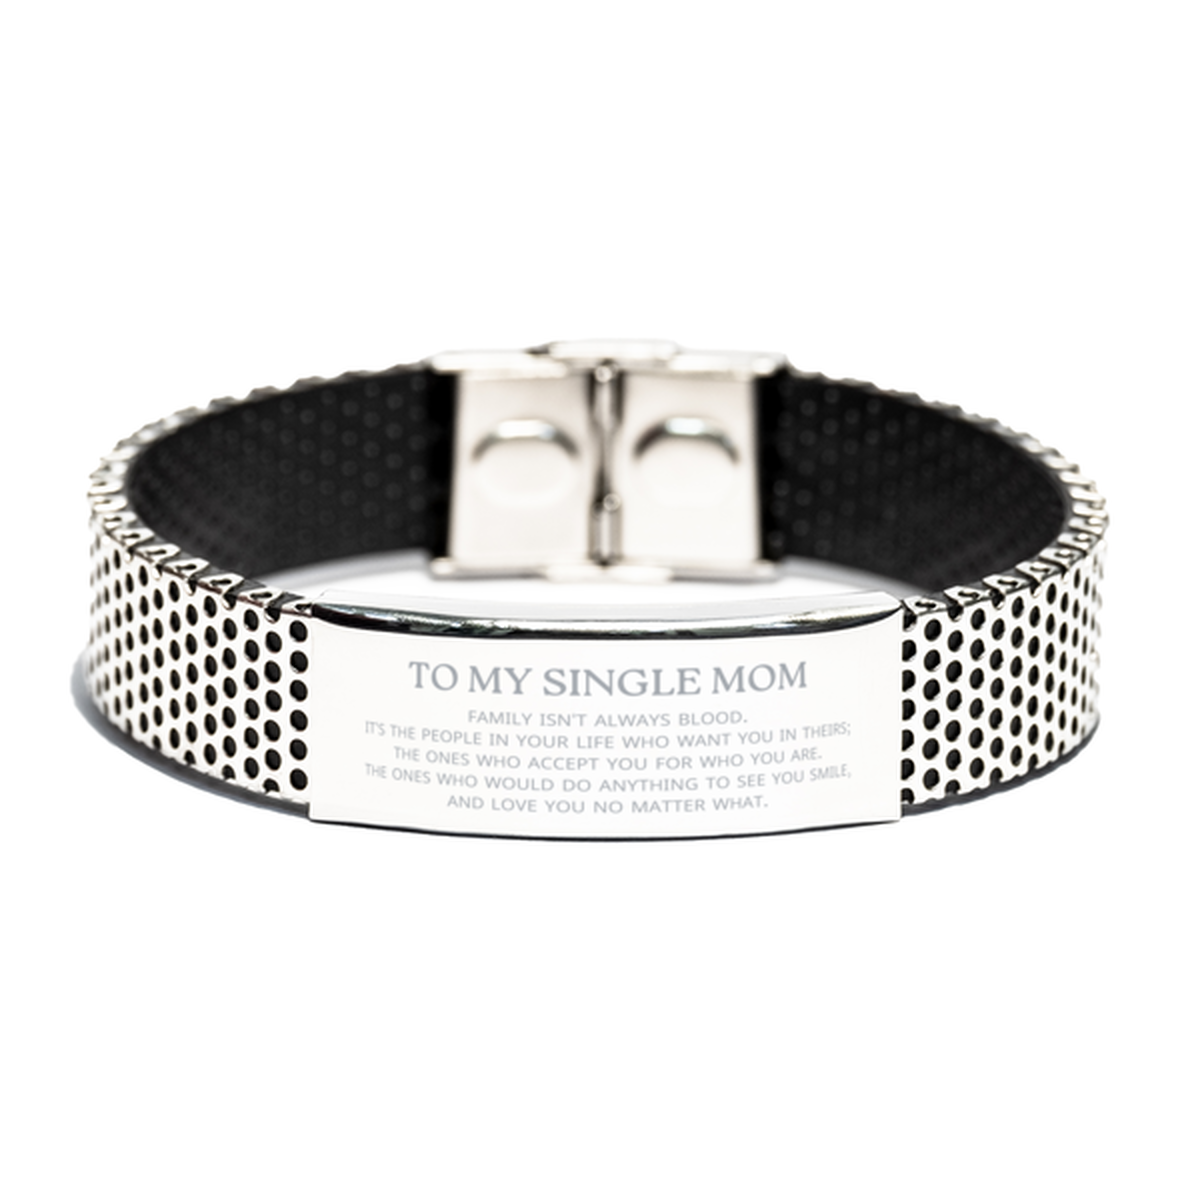 To My Single Mom Gifts, Family isn't always blood, Single Mom Stainless Steel Bracelet, Birthday Christmas Unique Present For Single Mom